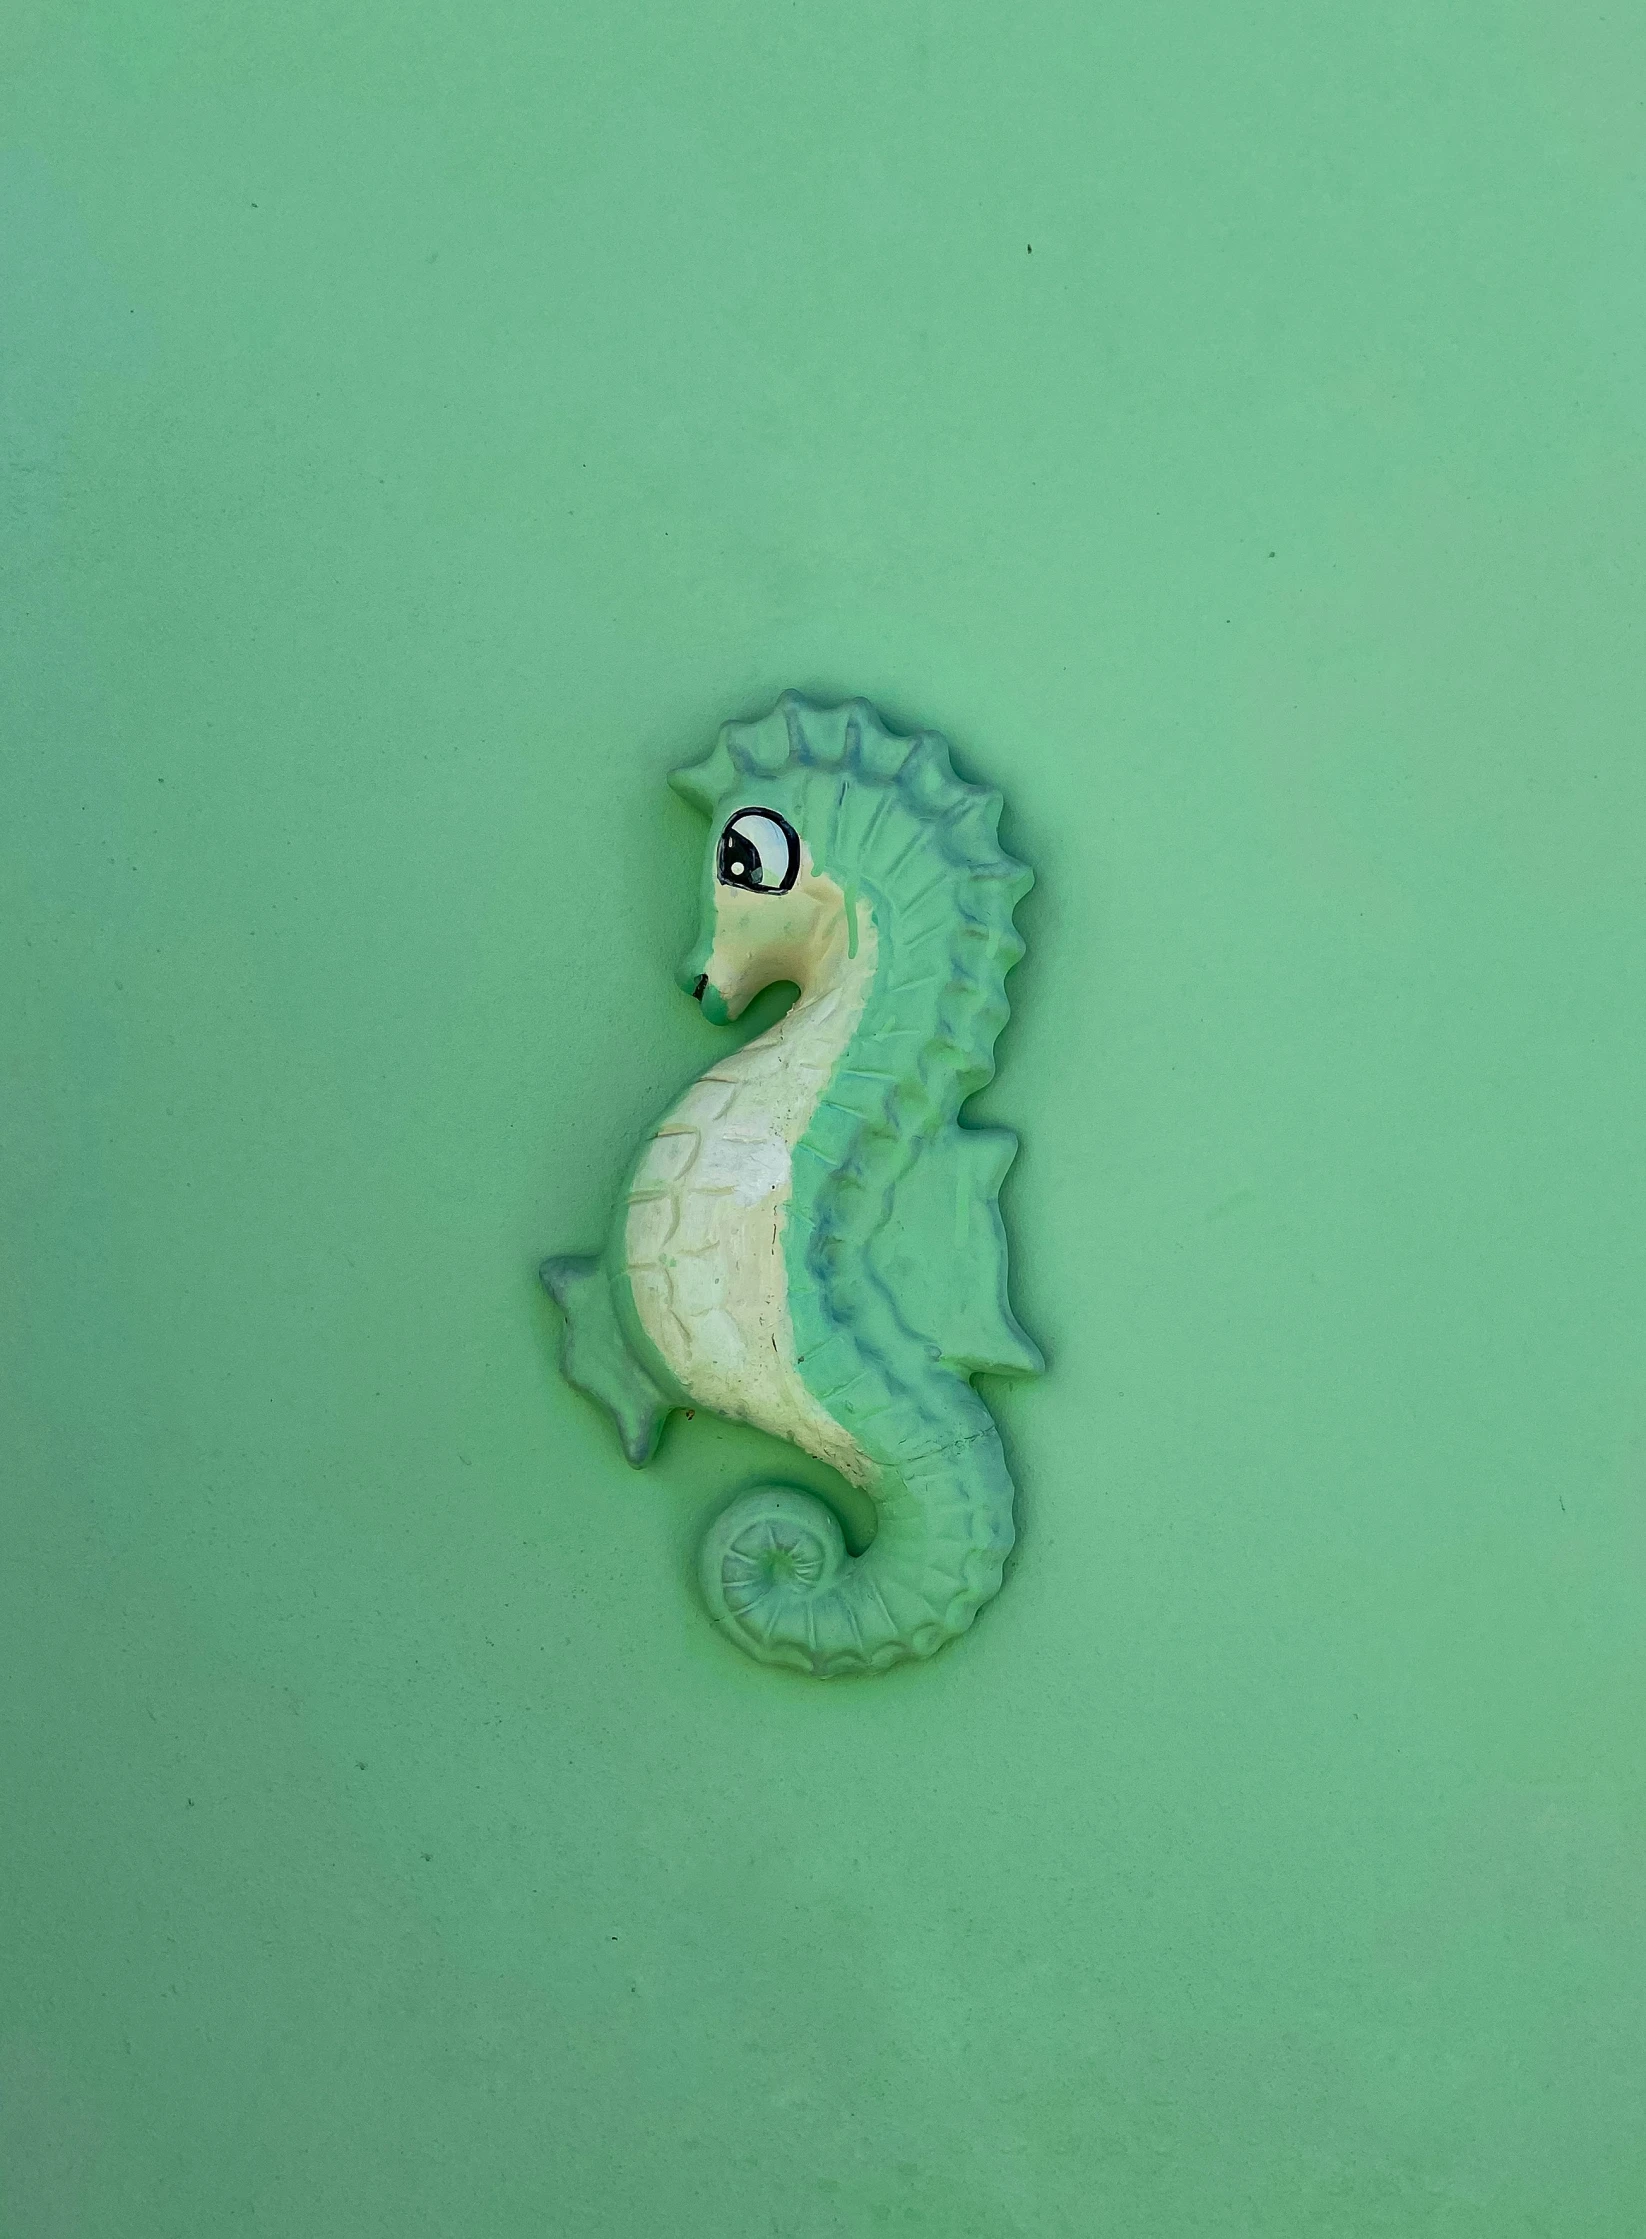 a very cute little seahorse on the green water